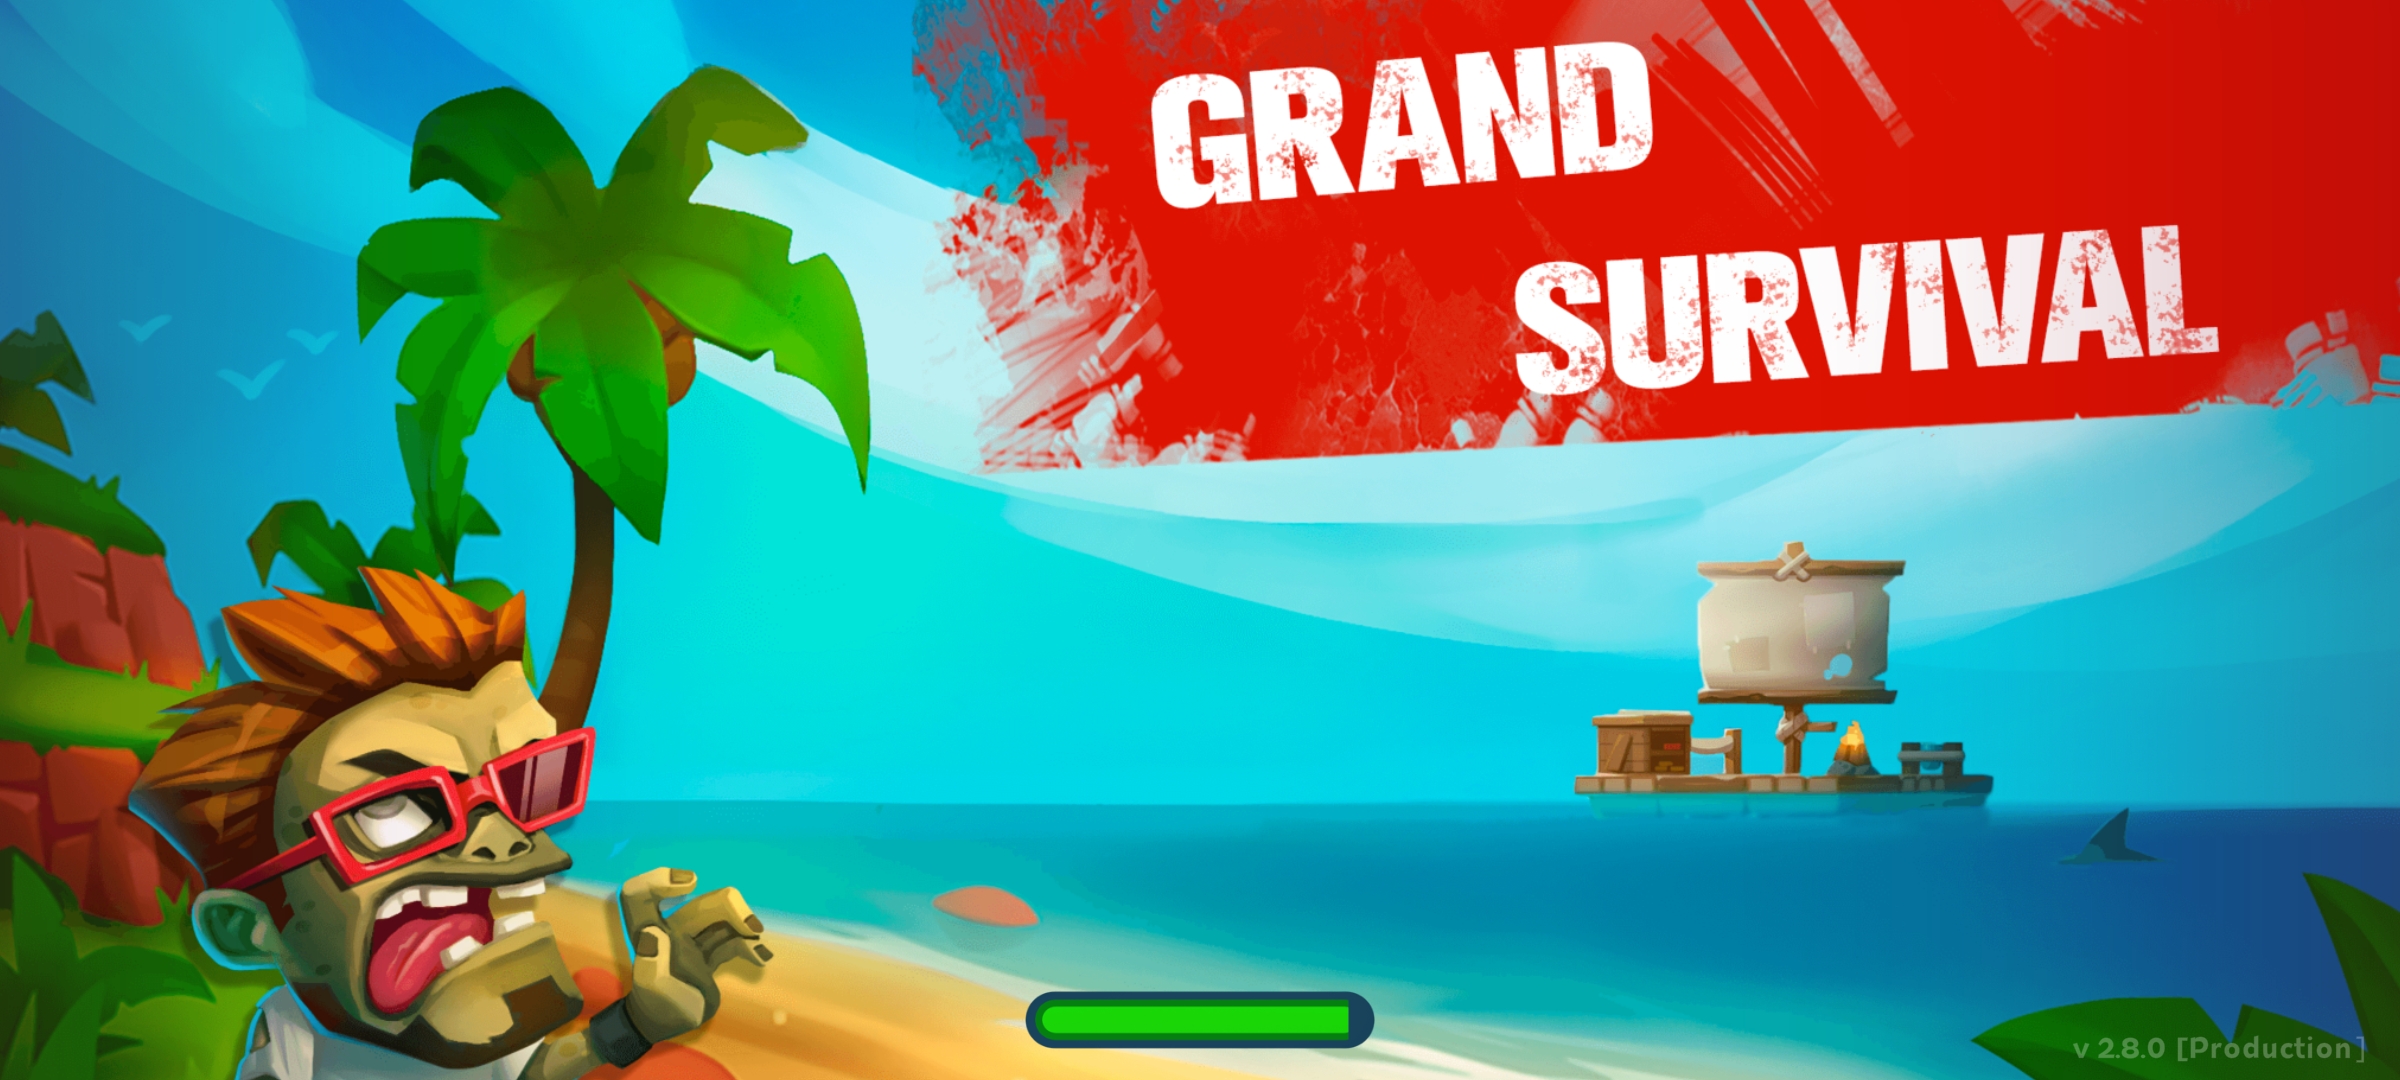 [Game Android] Grand Survival: Raft Adventure Tiếng Việt